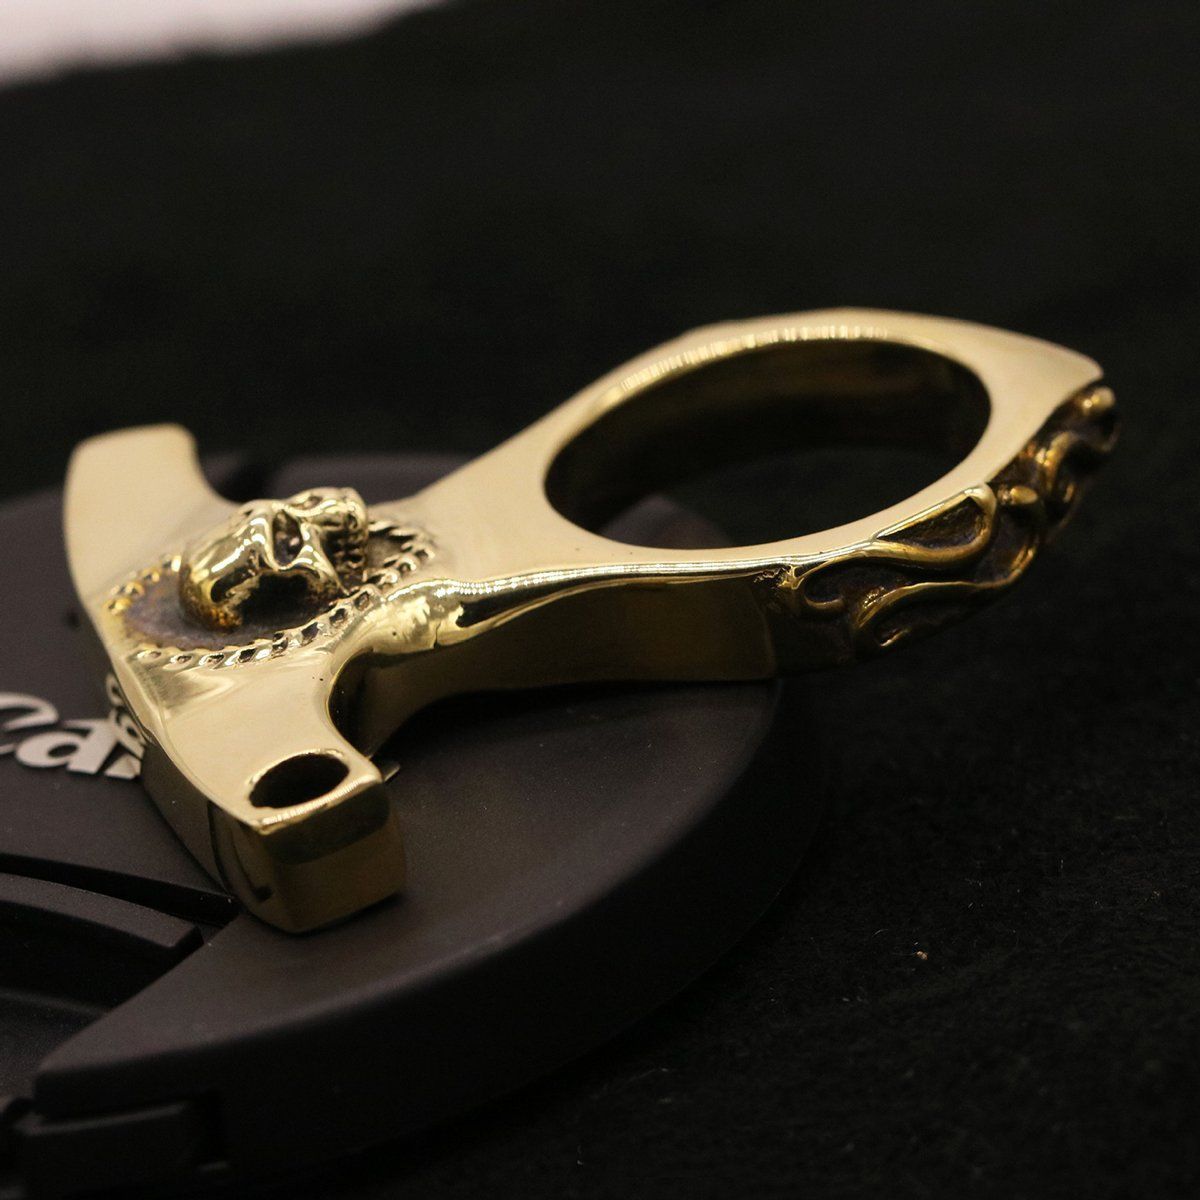 Real Brass Knuckles Keychain - Cakra EDC Gadgets